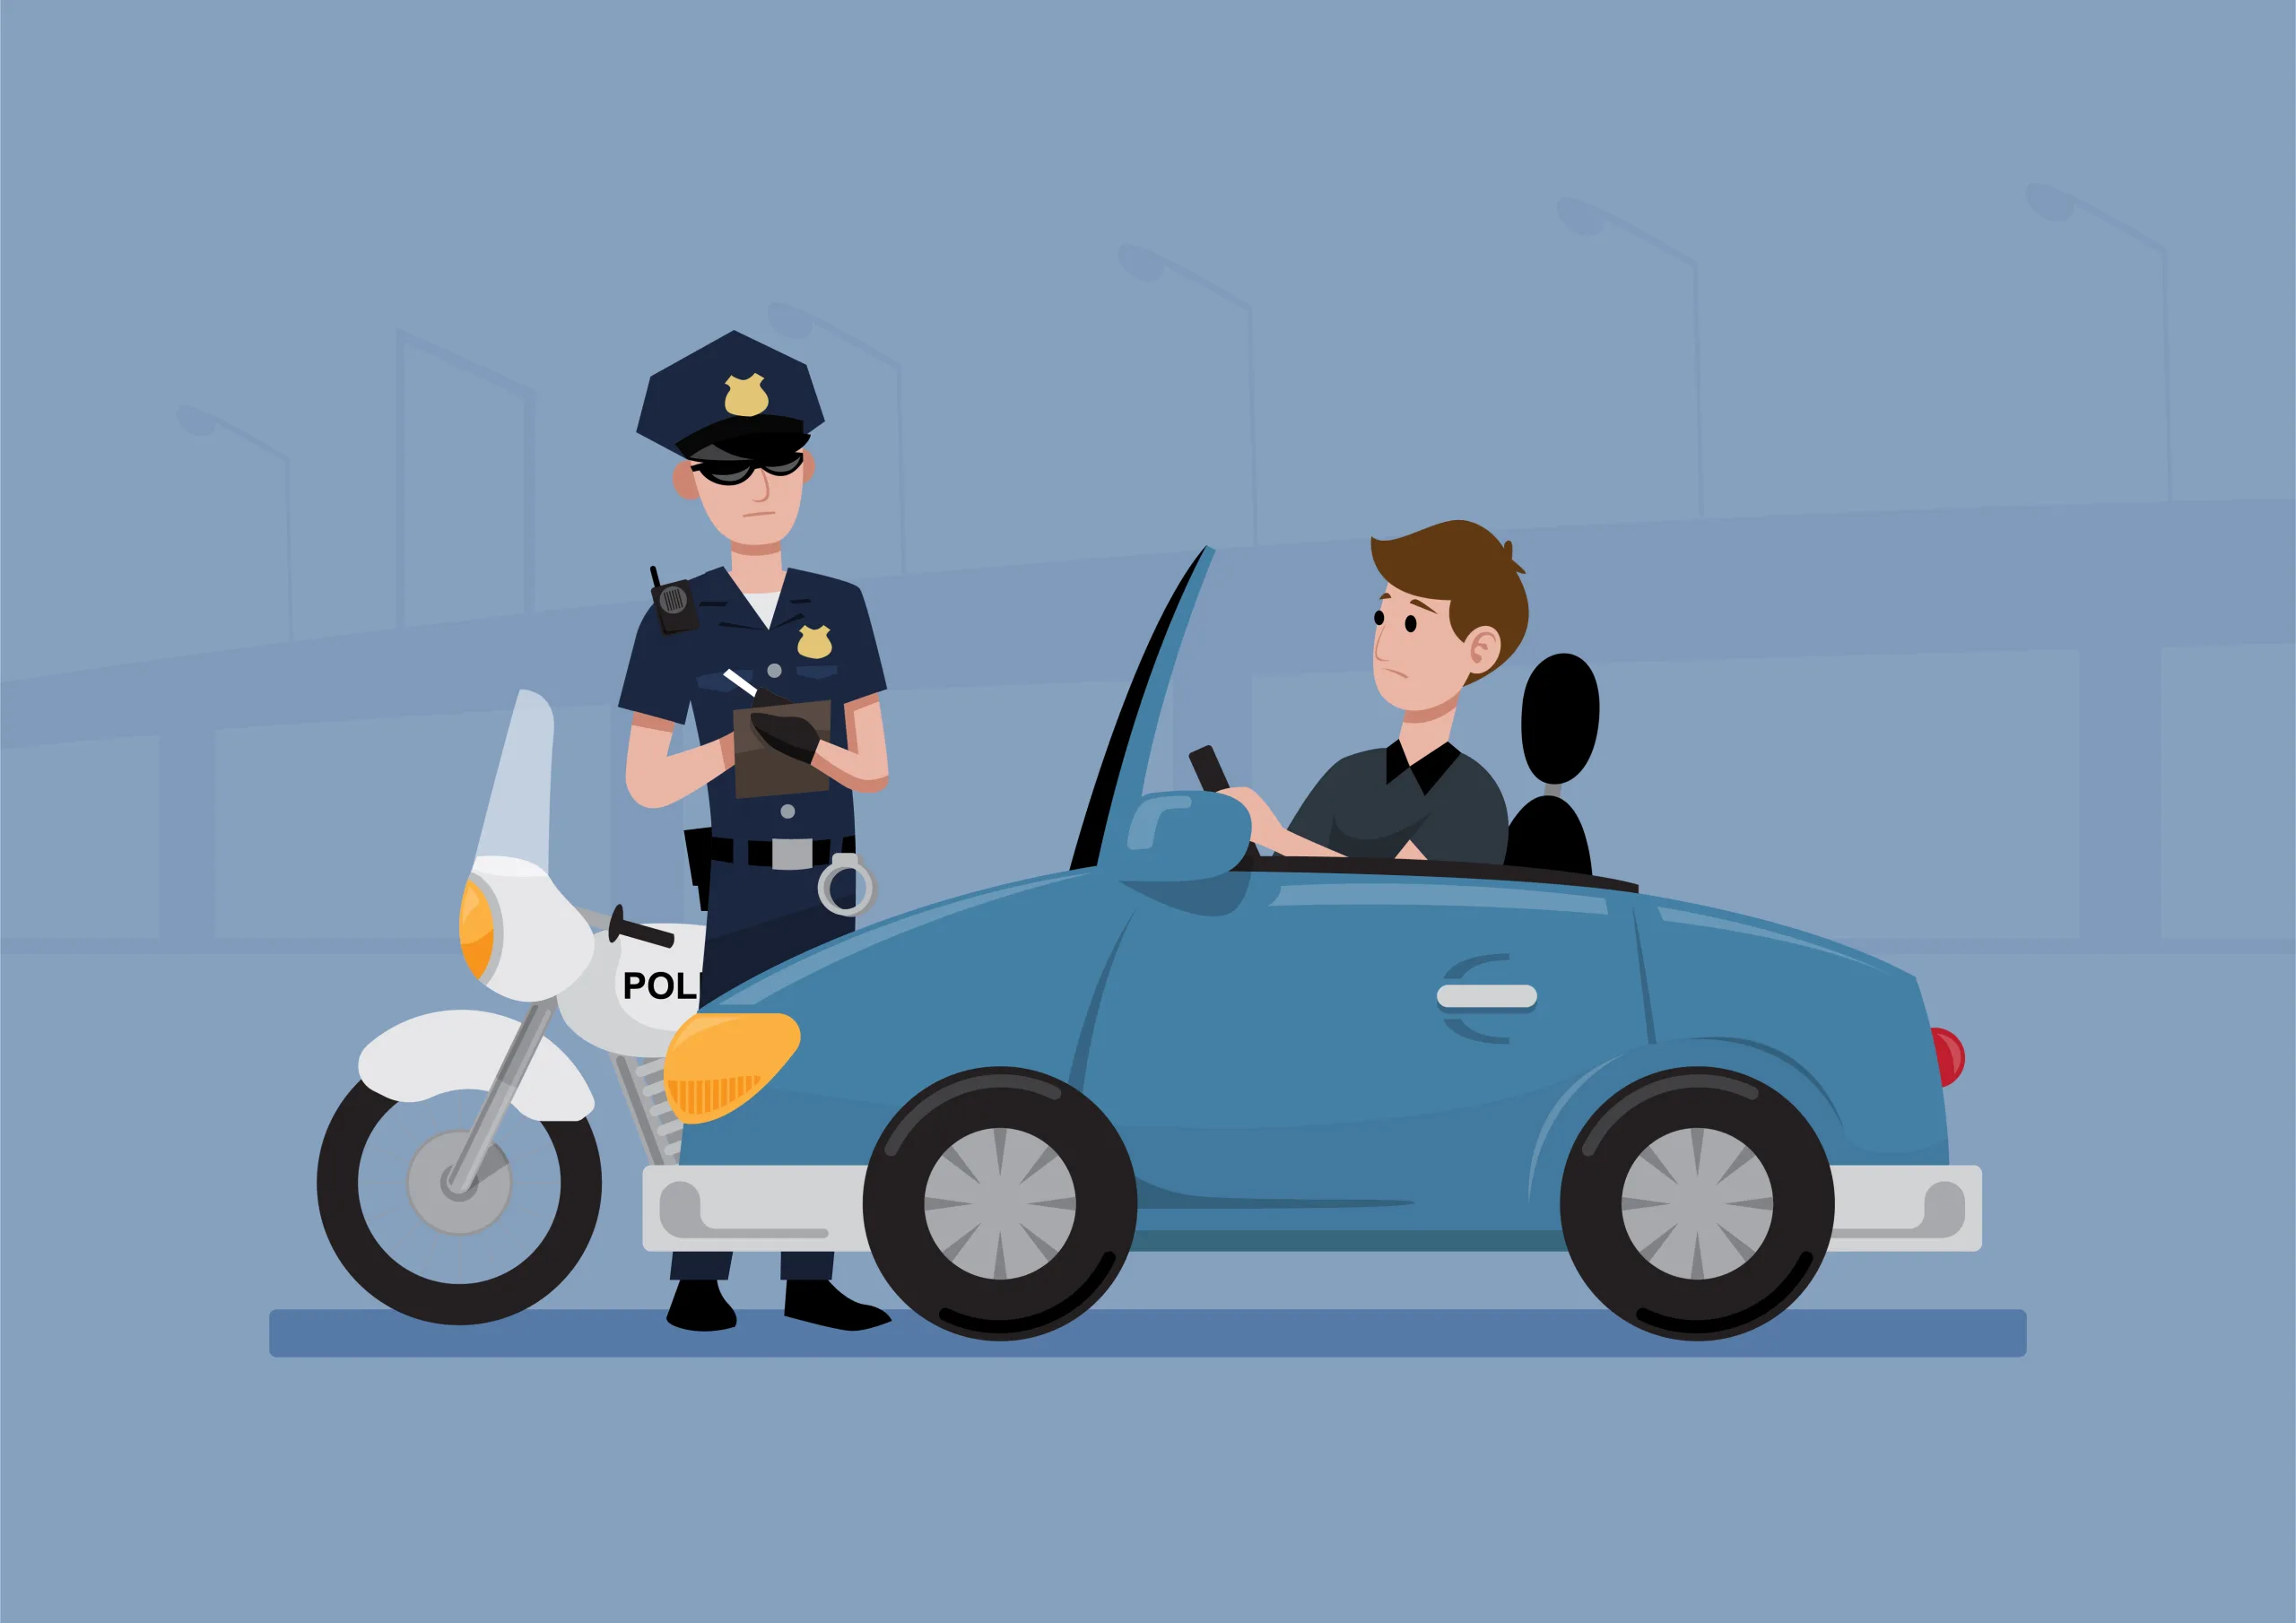 How to pay traffic fines in Sharjah?